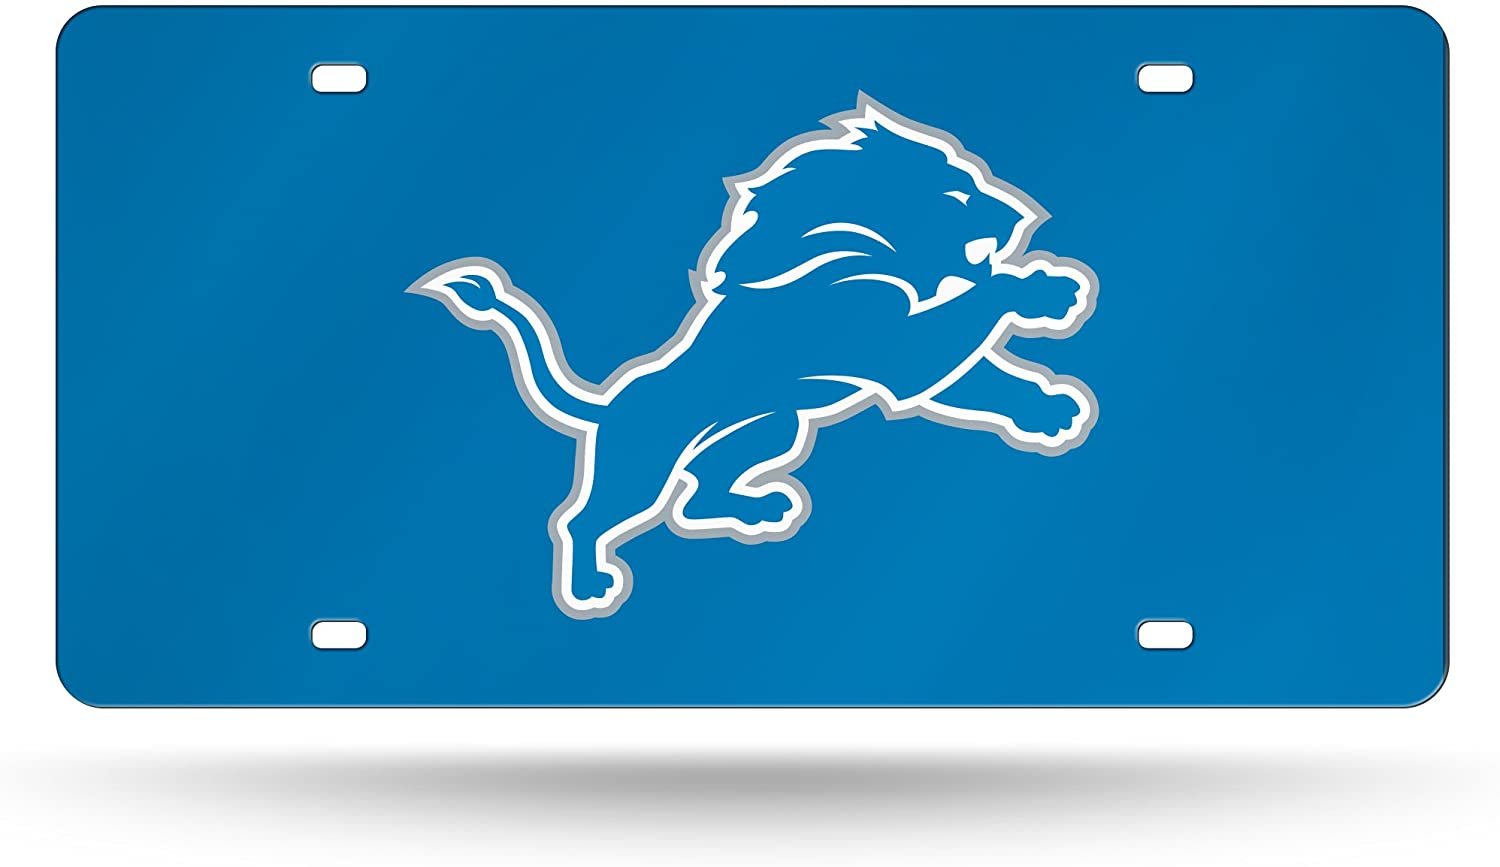 Detroit Lions Premium Laser Cut Tag License Plate, Mirrored Acrylic Inlaid, 6x12 Inch